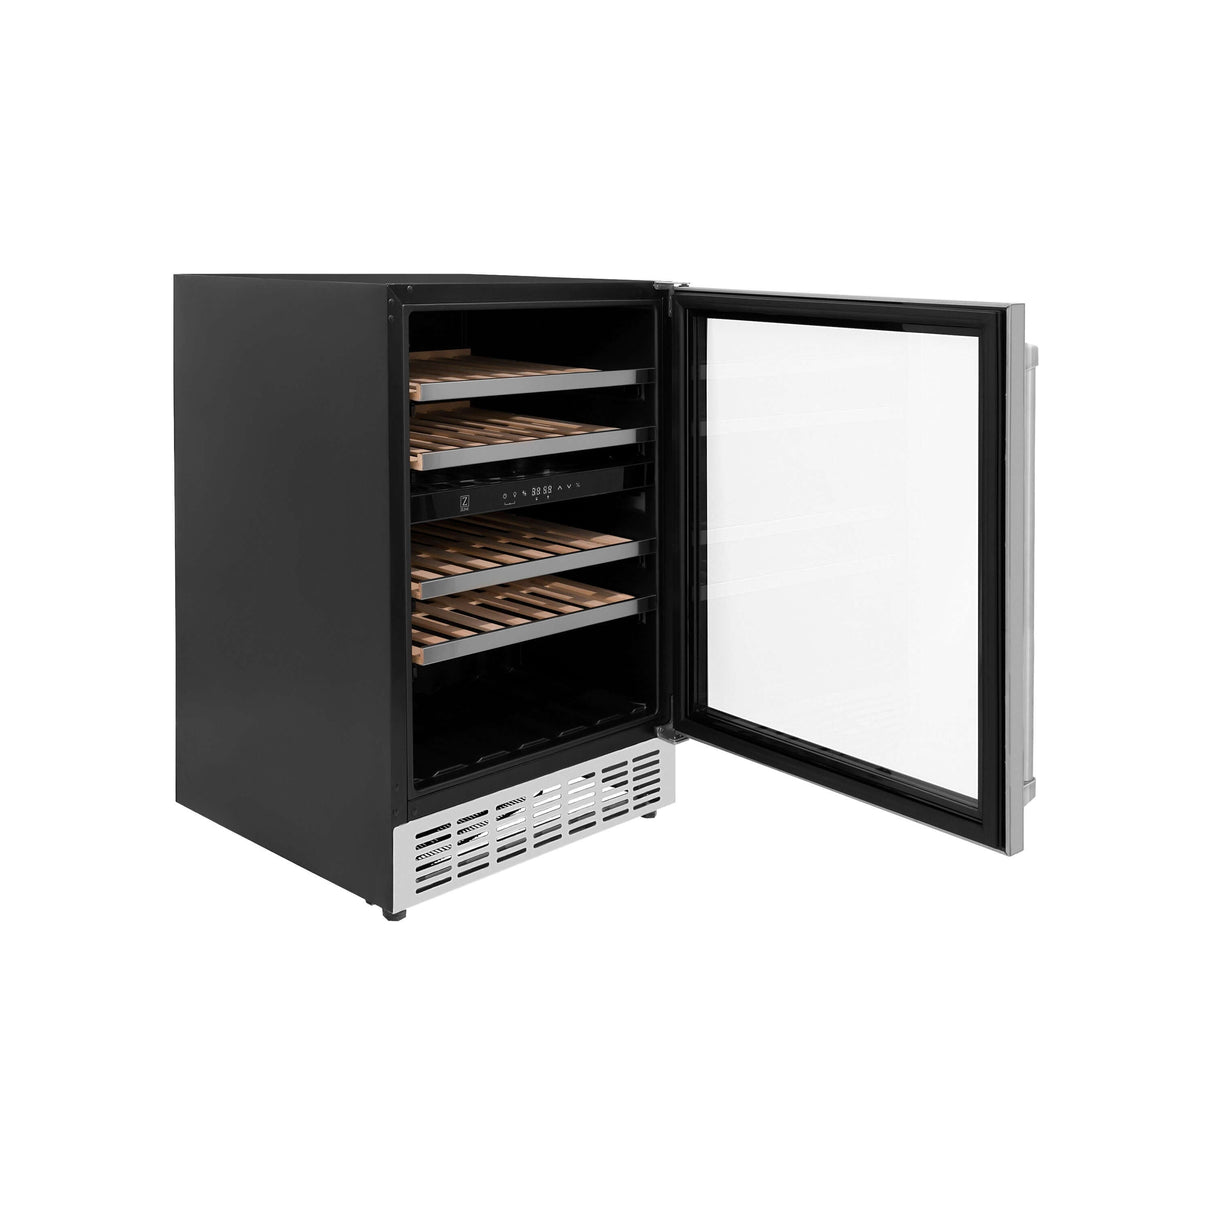 ZLINE 24 In. Monument Dual Zone 44-Bottle Wine Cooler in Stainless Steel with Wood Shelf (RWV-UD-24)